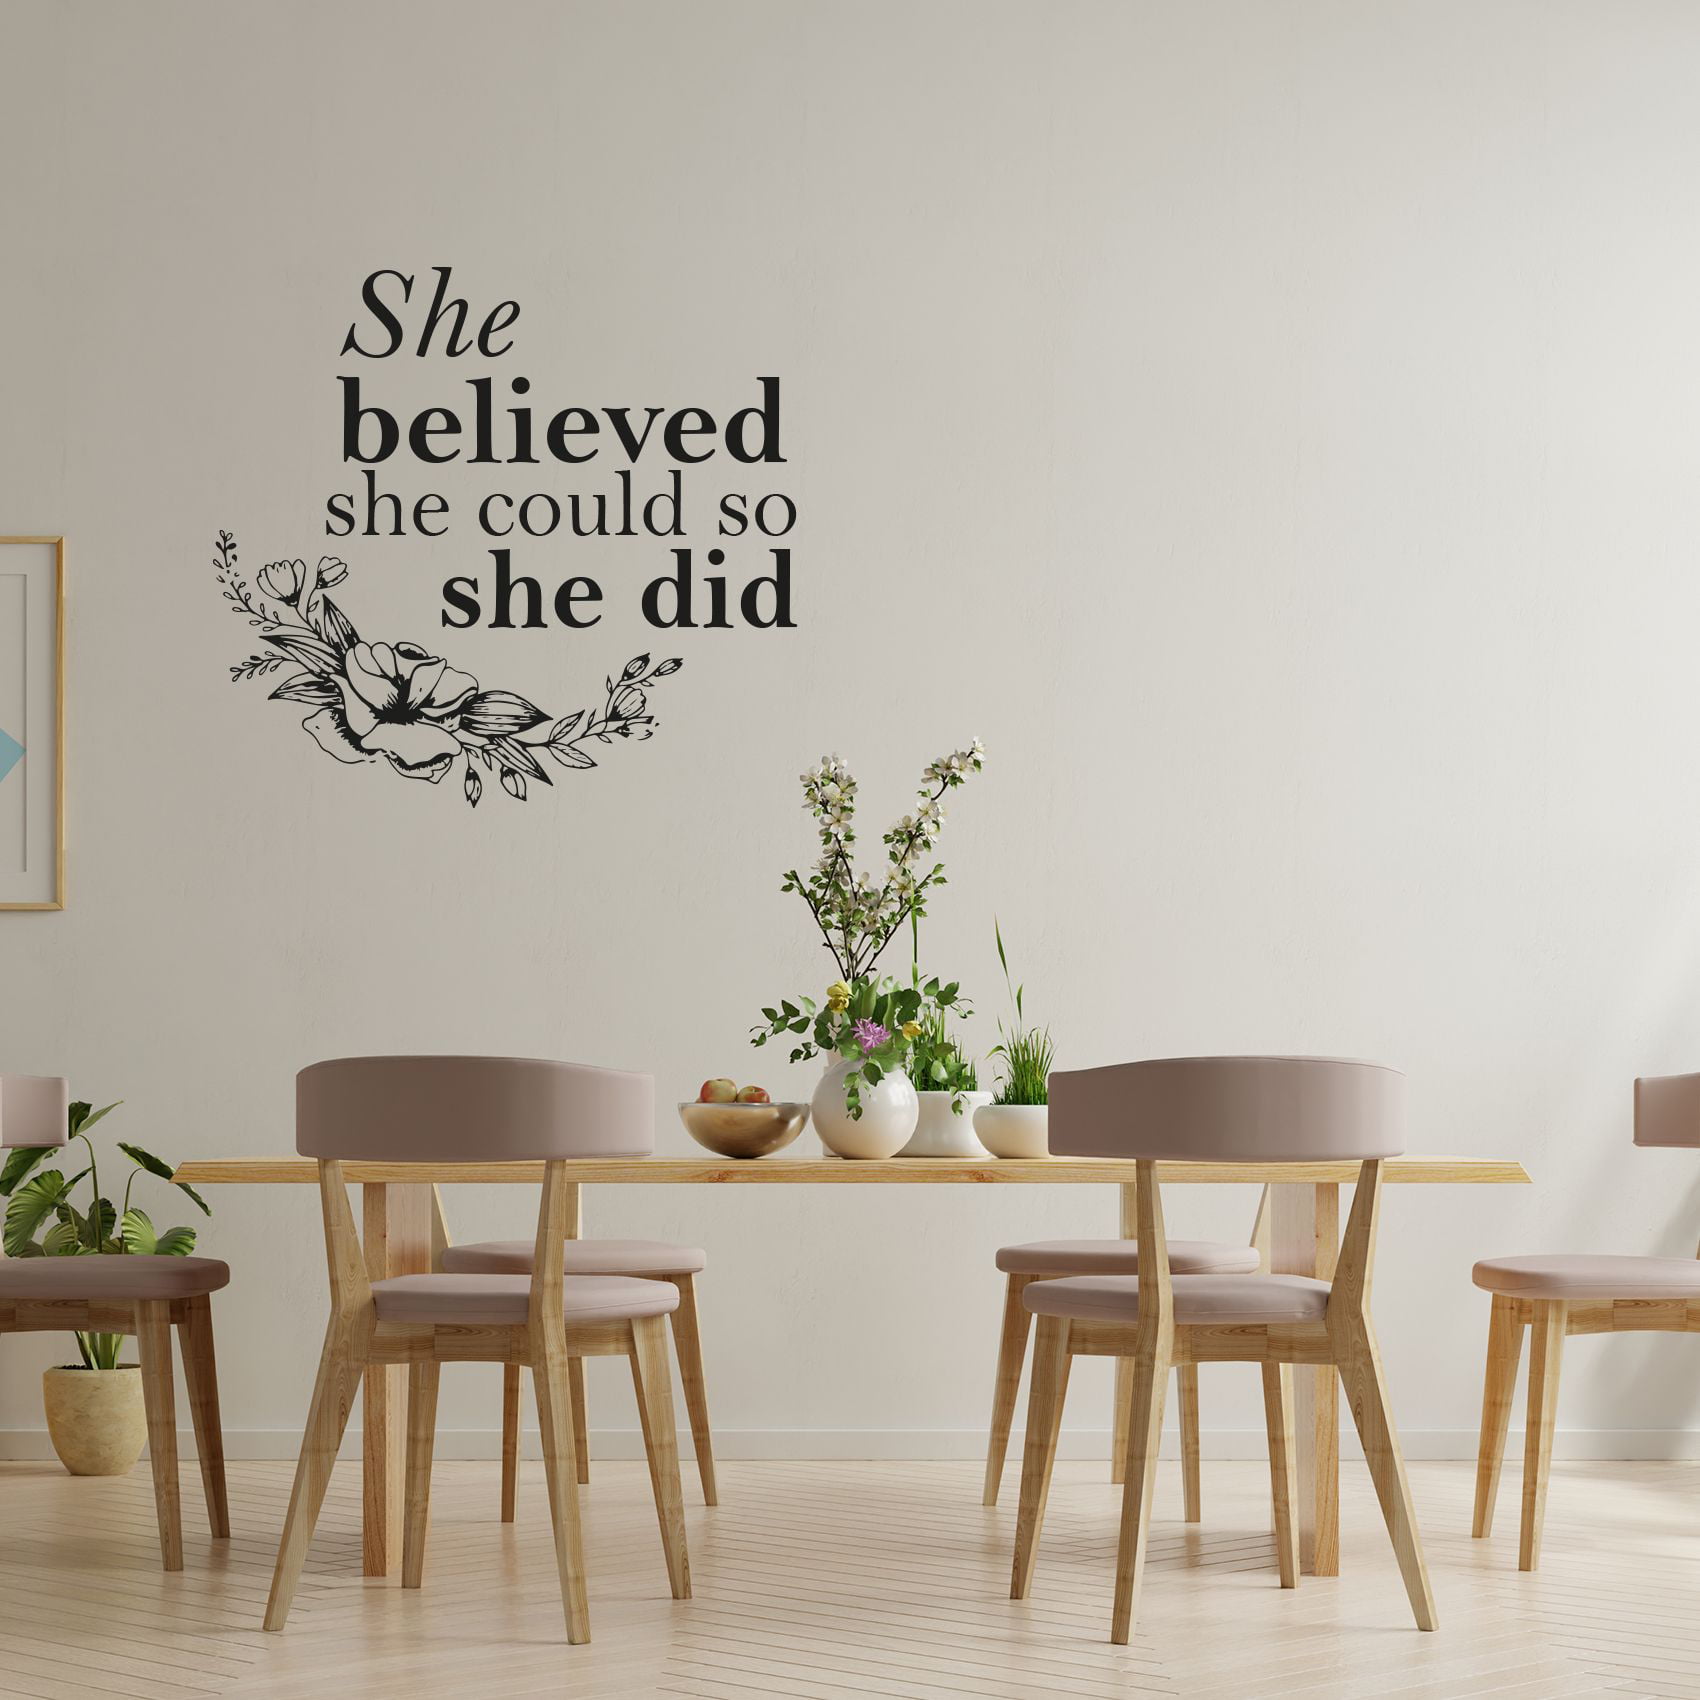 She Believed she Could so she did Wall Decal Home Decor Inspirational Quote Art 